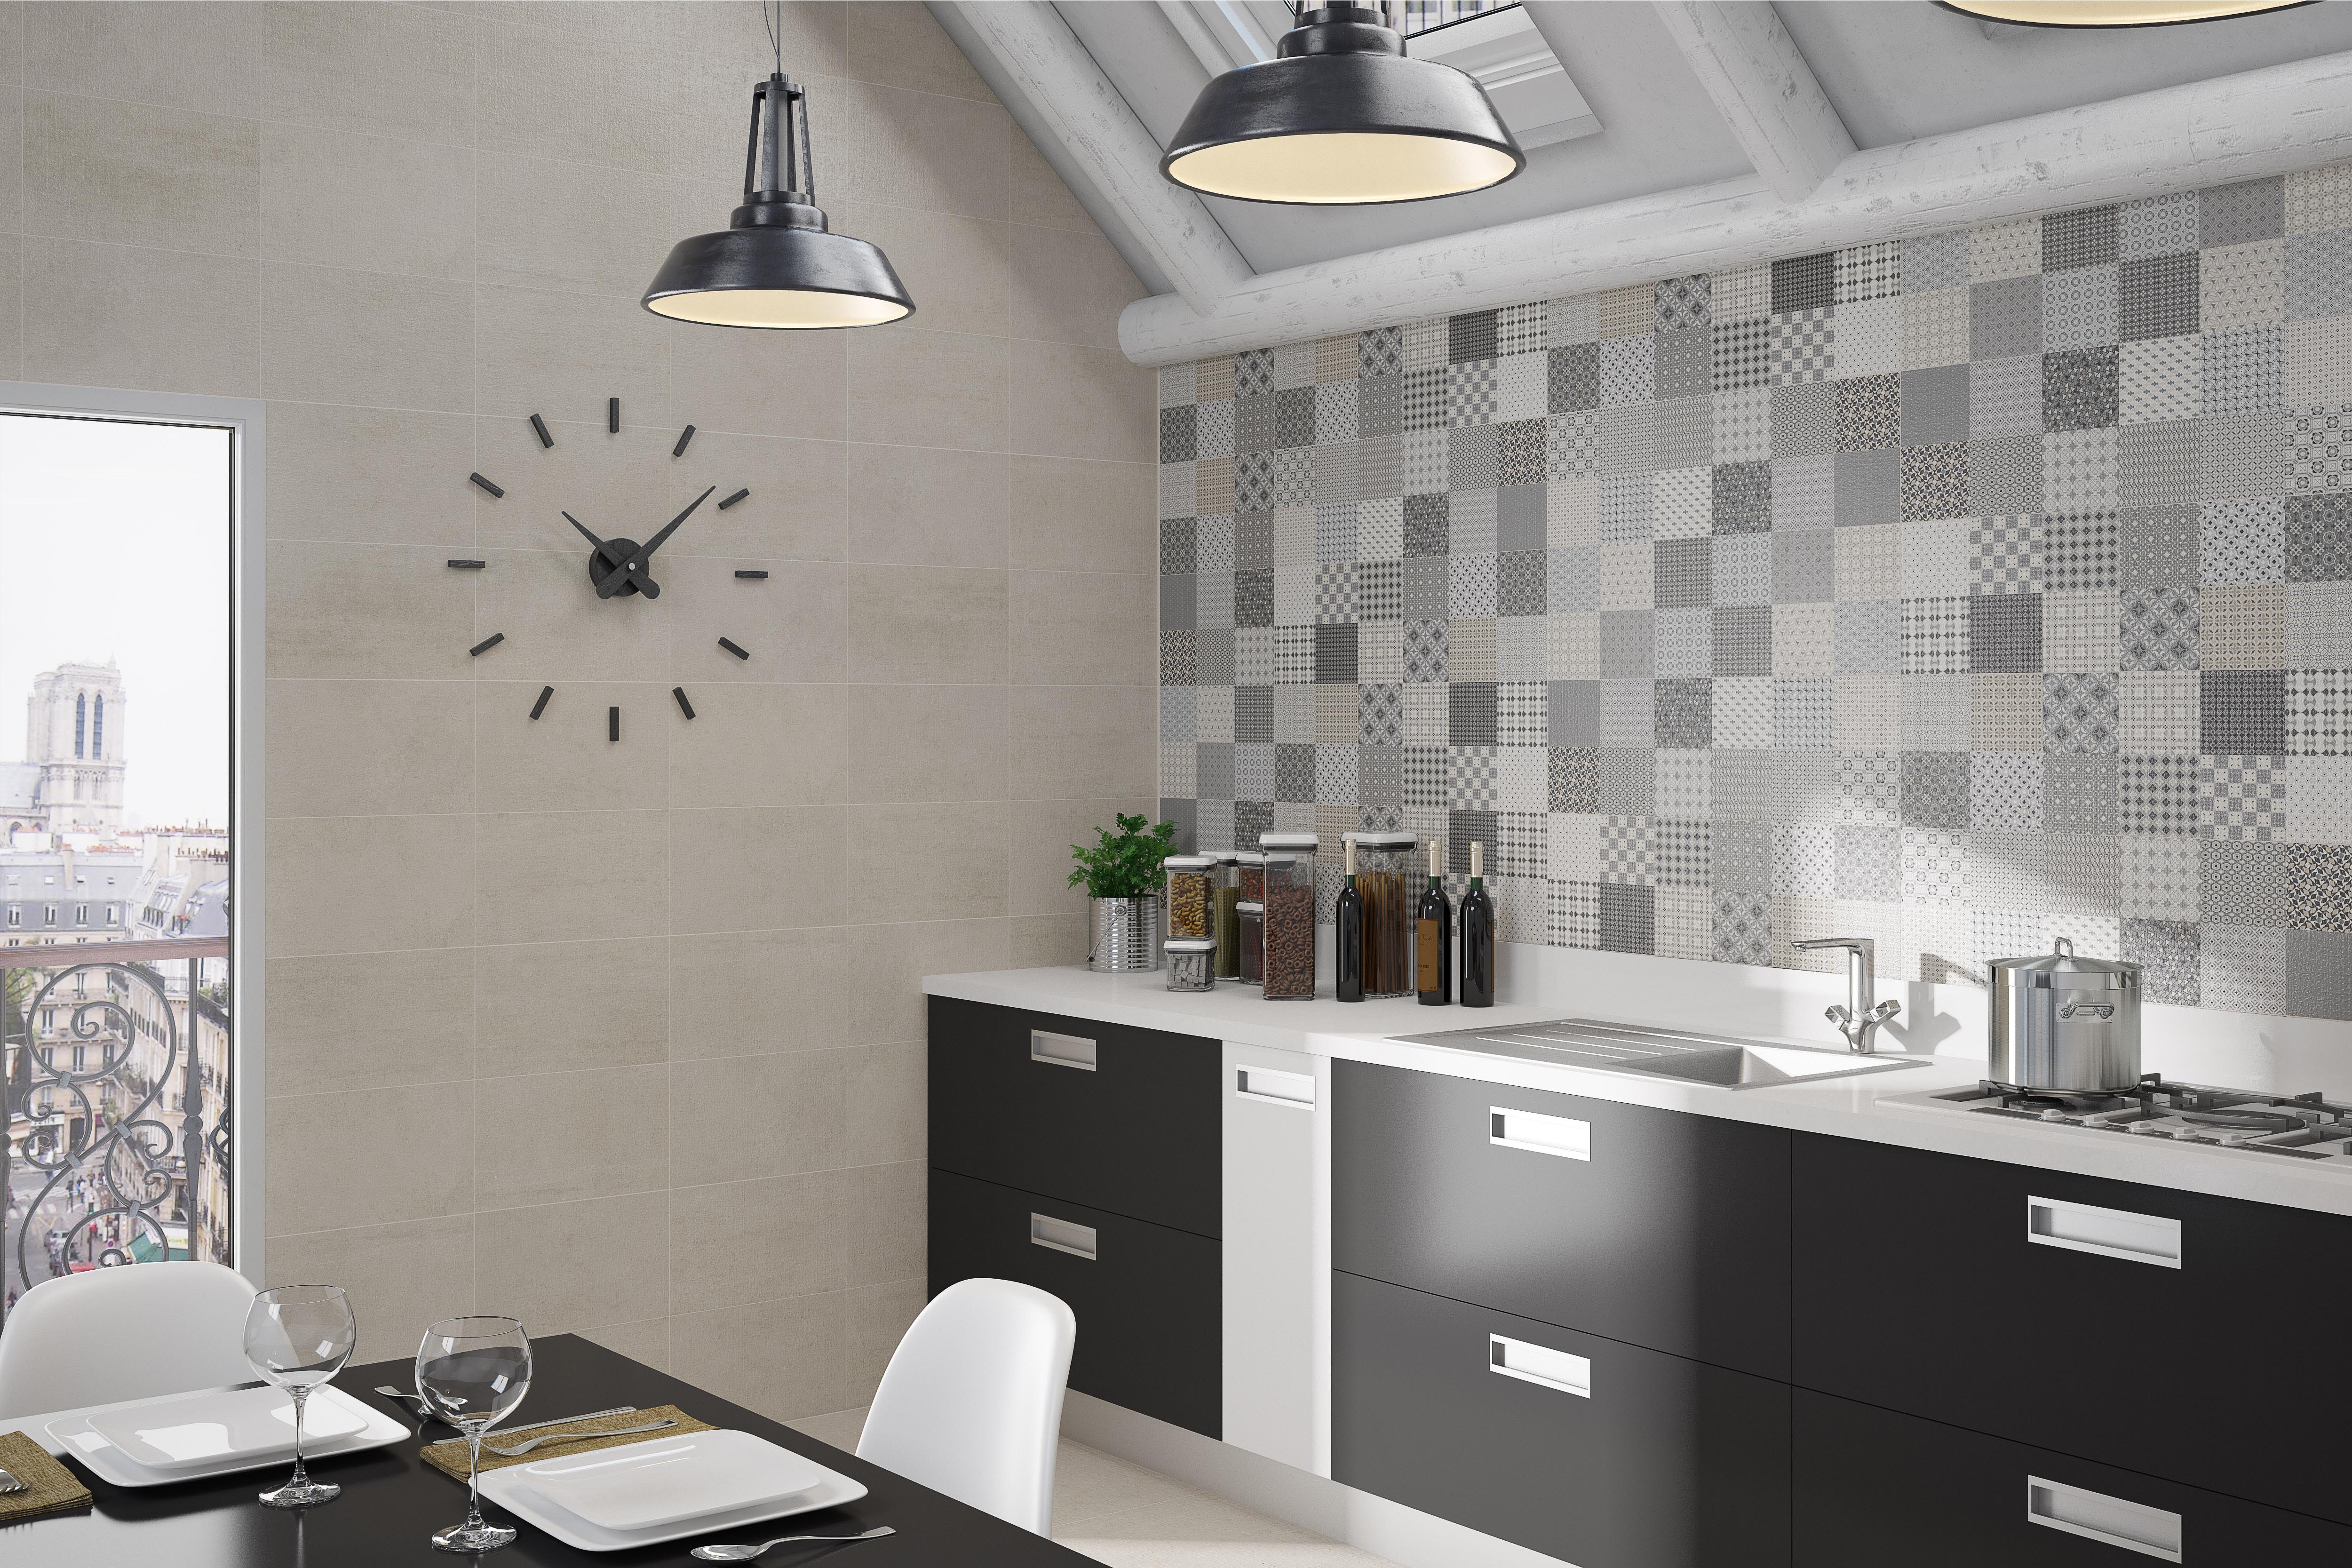 Kitchen Wall Tiles Ideas With Images